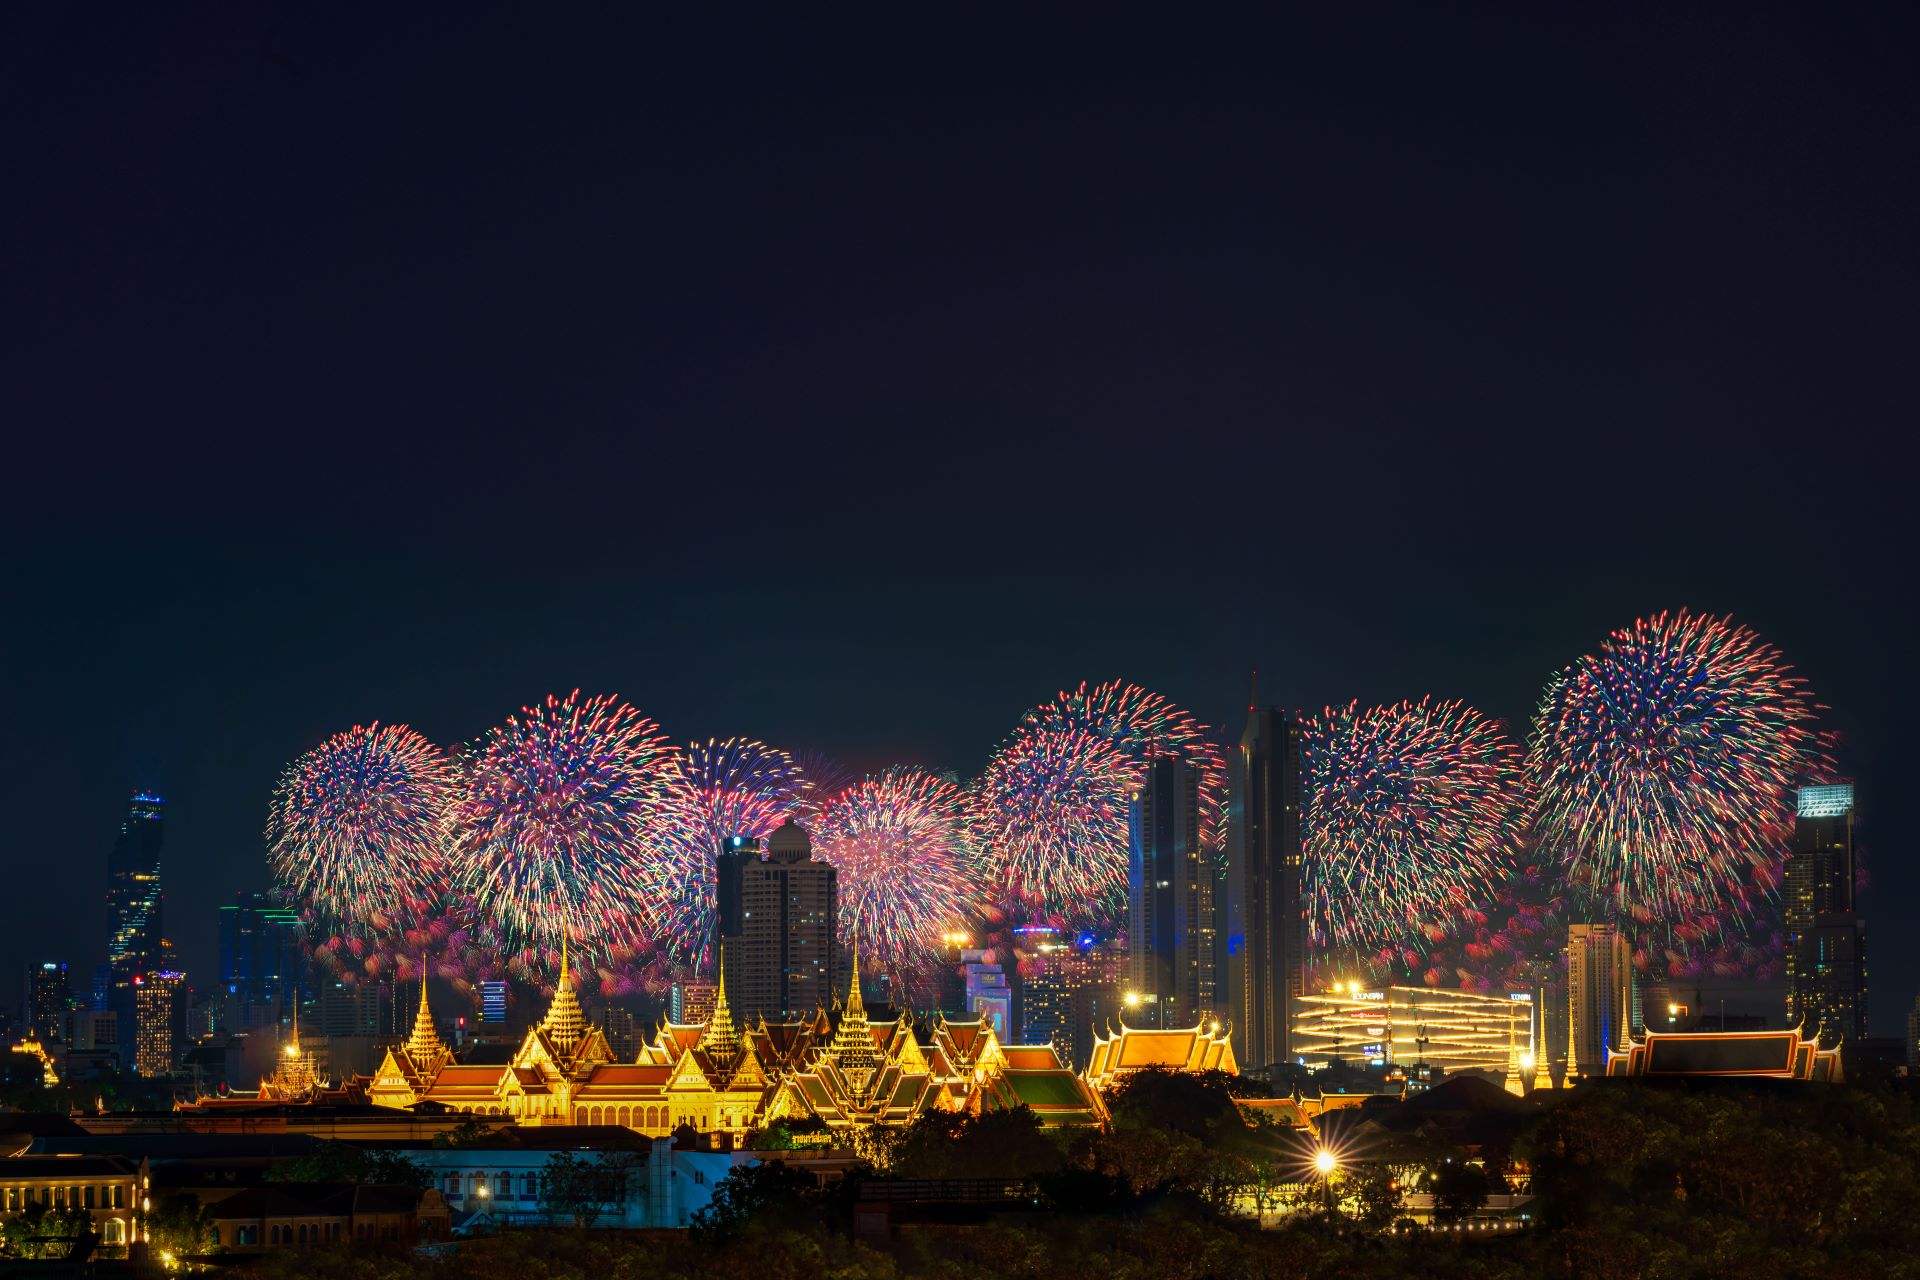 The Grand Palace in Bangkok is lit up fireworks in the night sky.